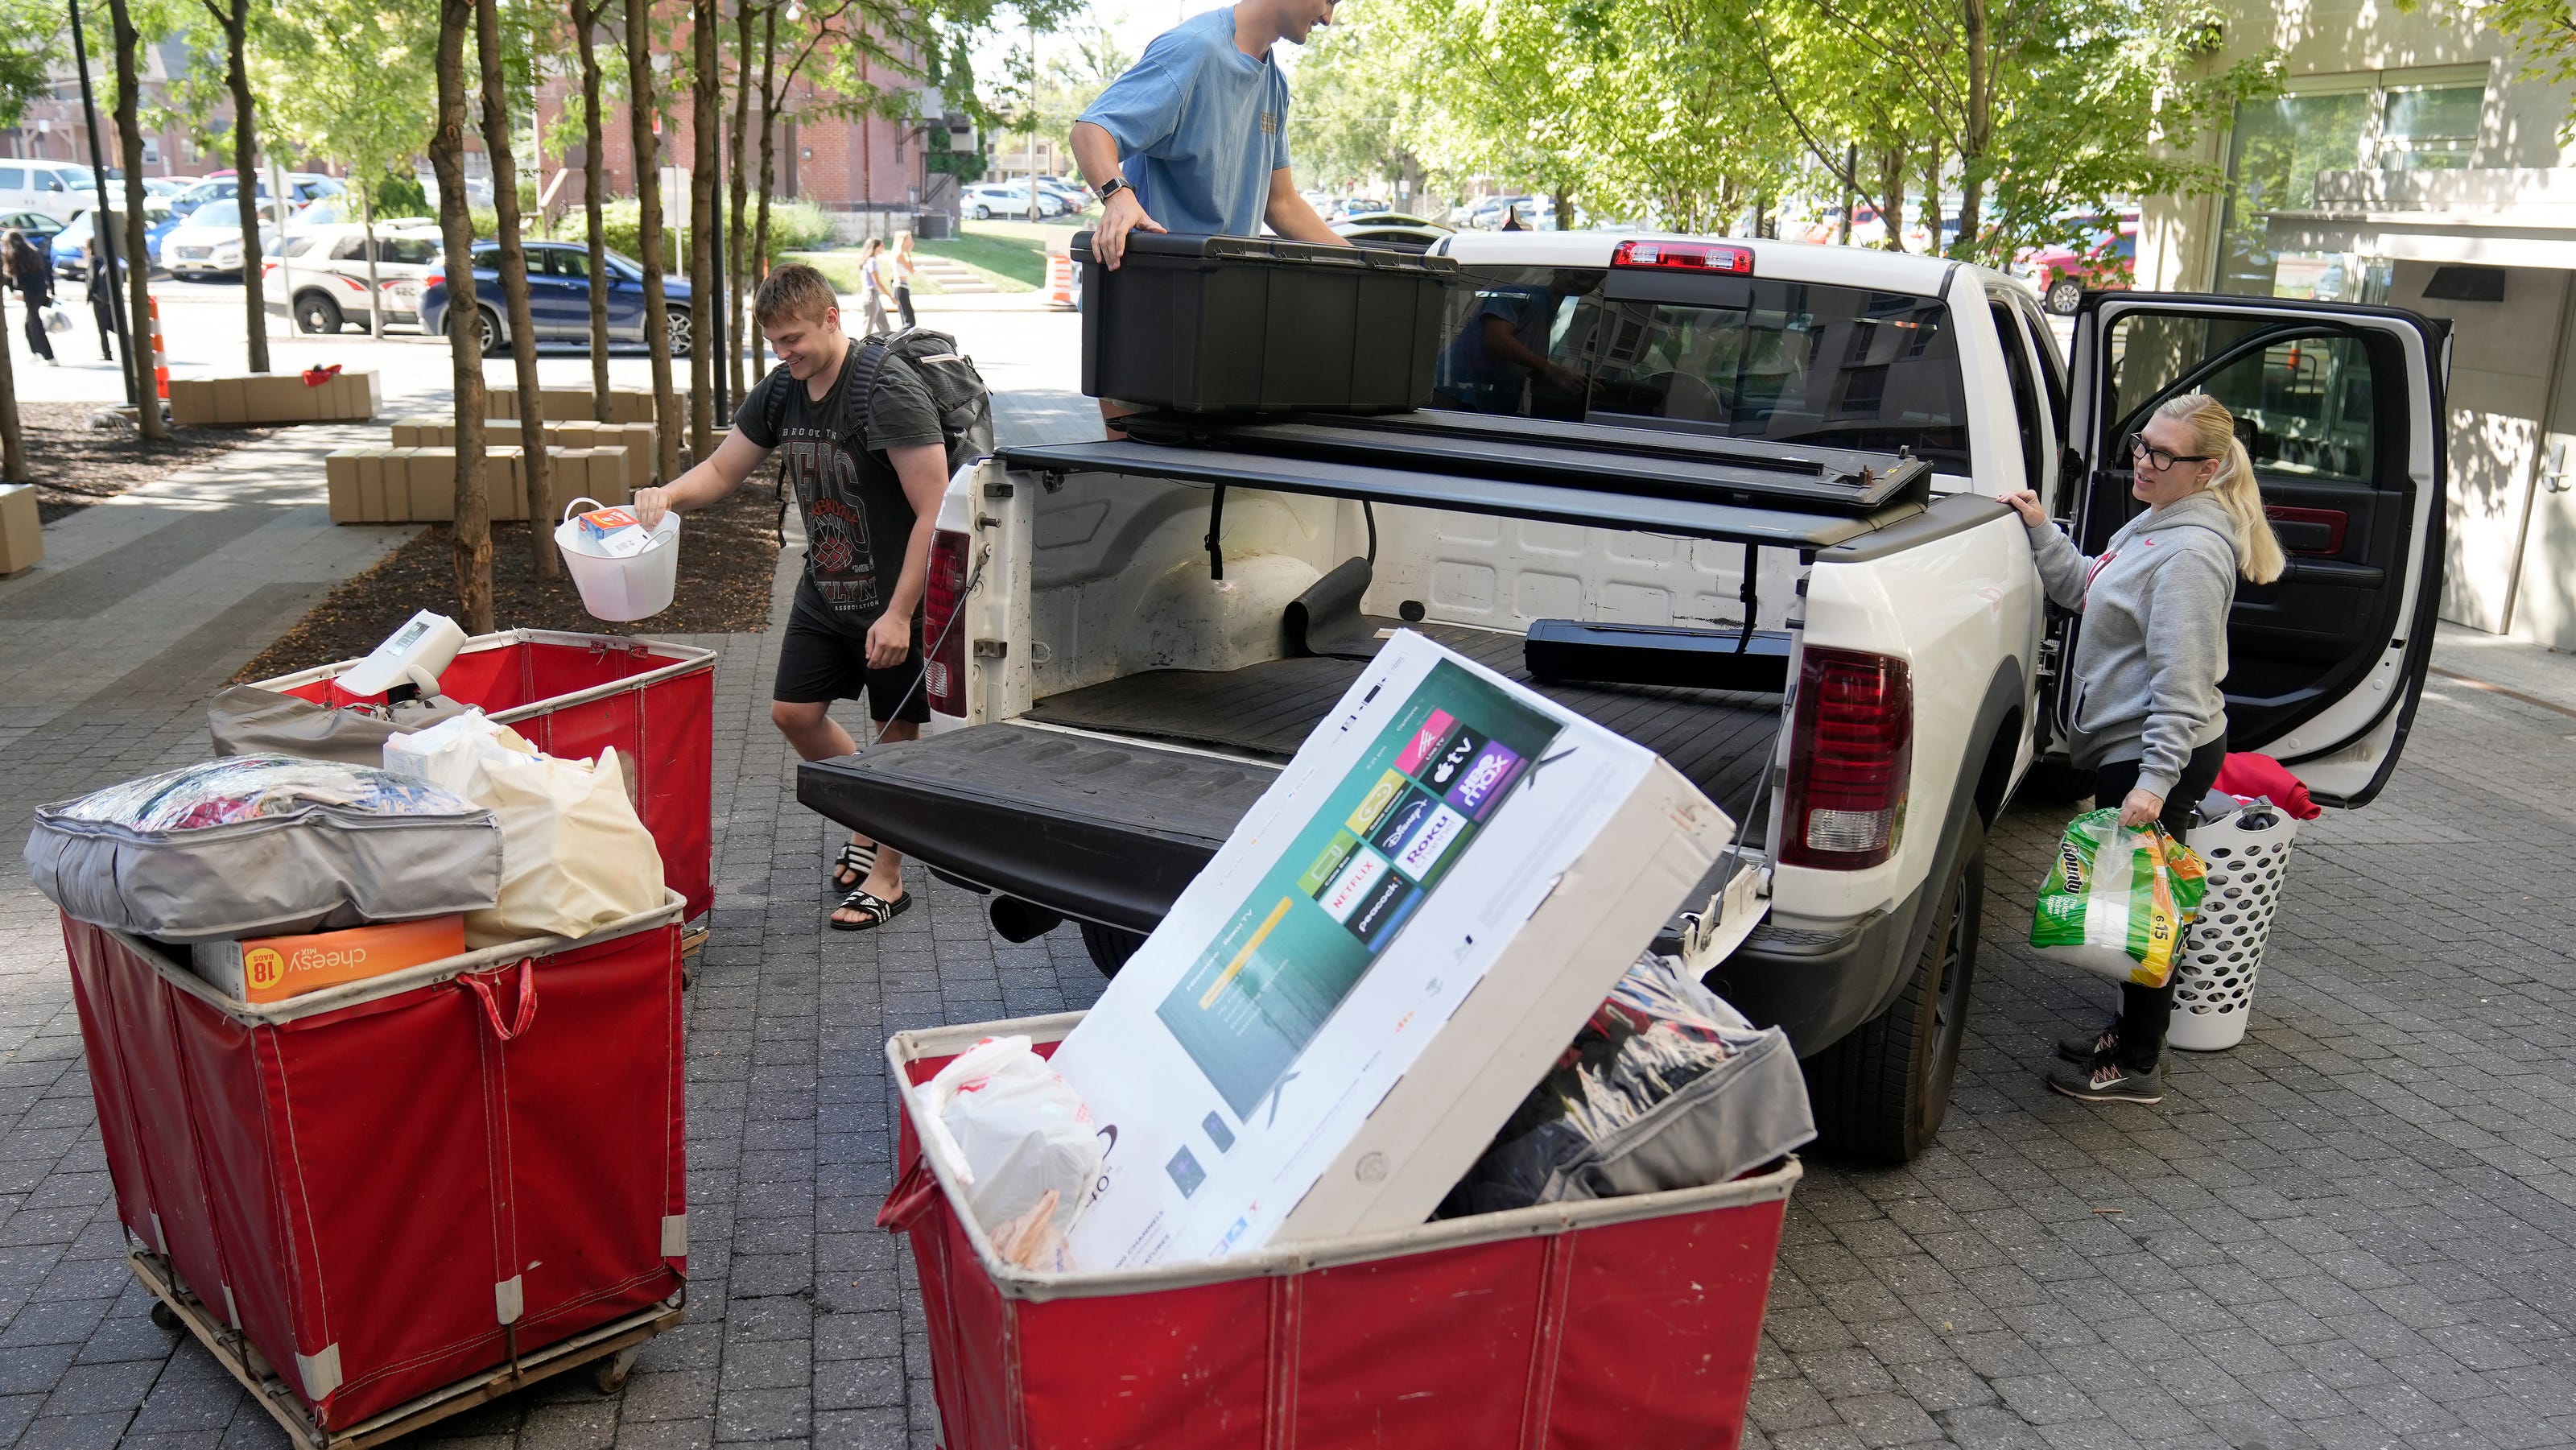 Ohio State students return to campus for movein week